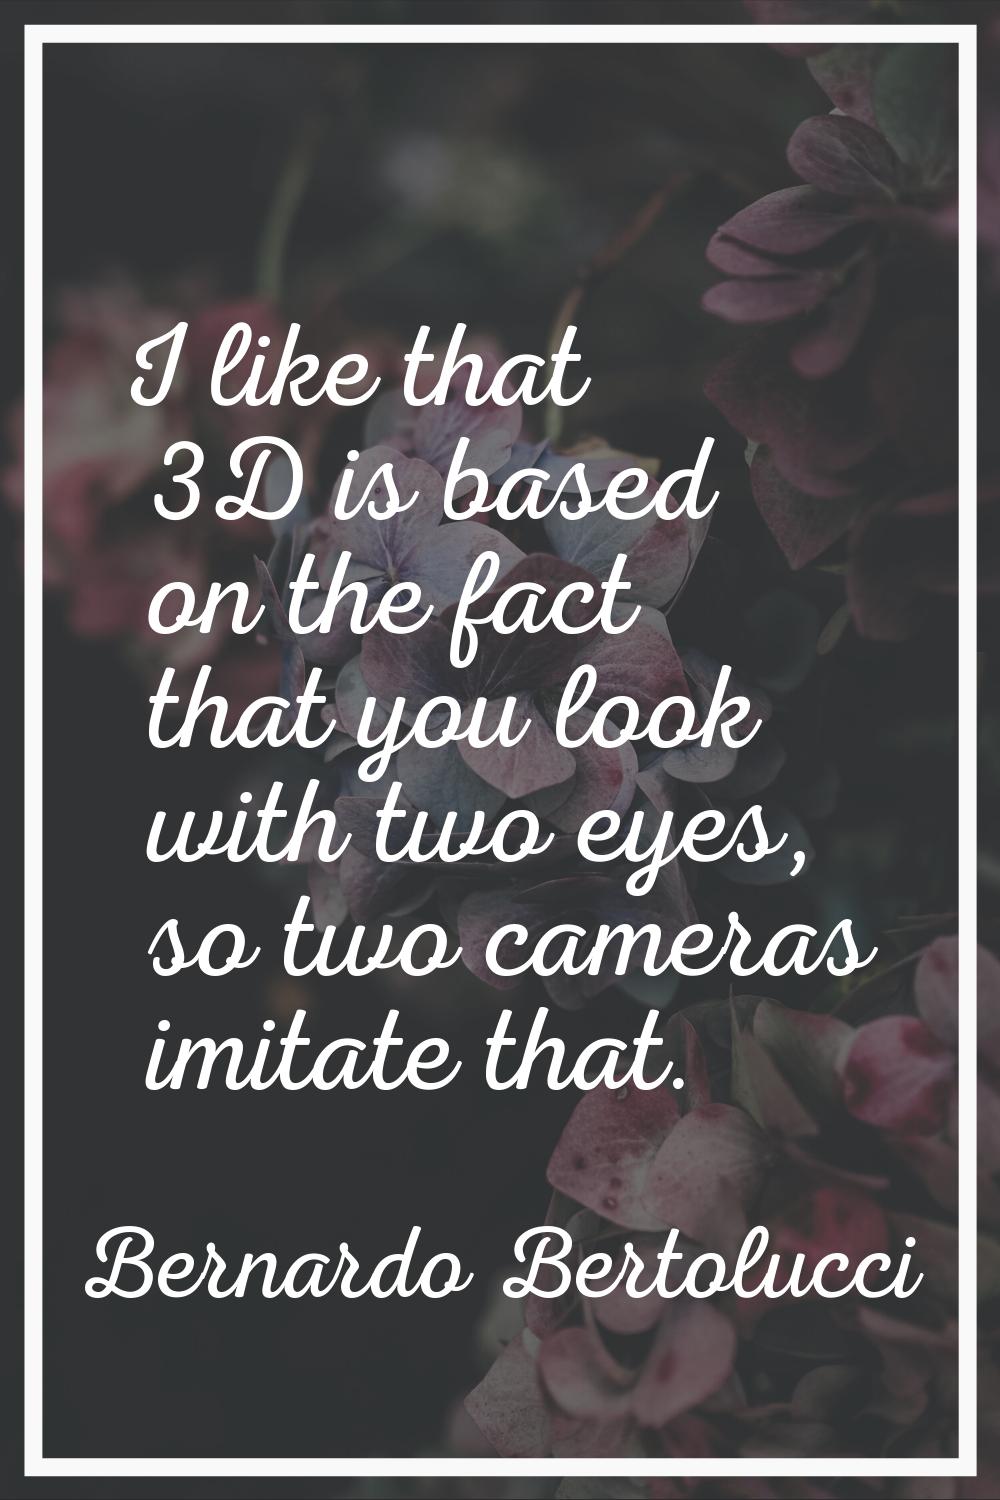 I like that 3D is based on the fact that you look with two eyes, so two cameras imitate that.